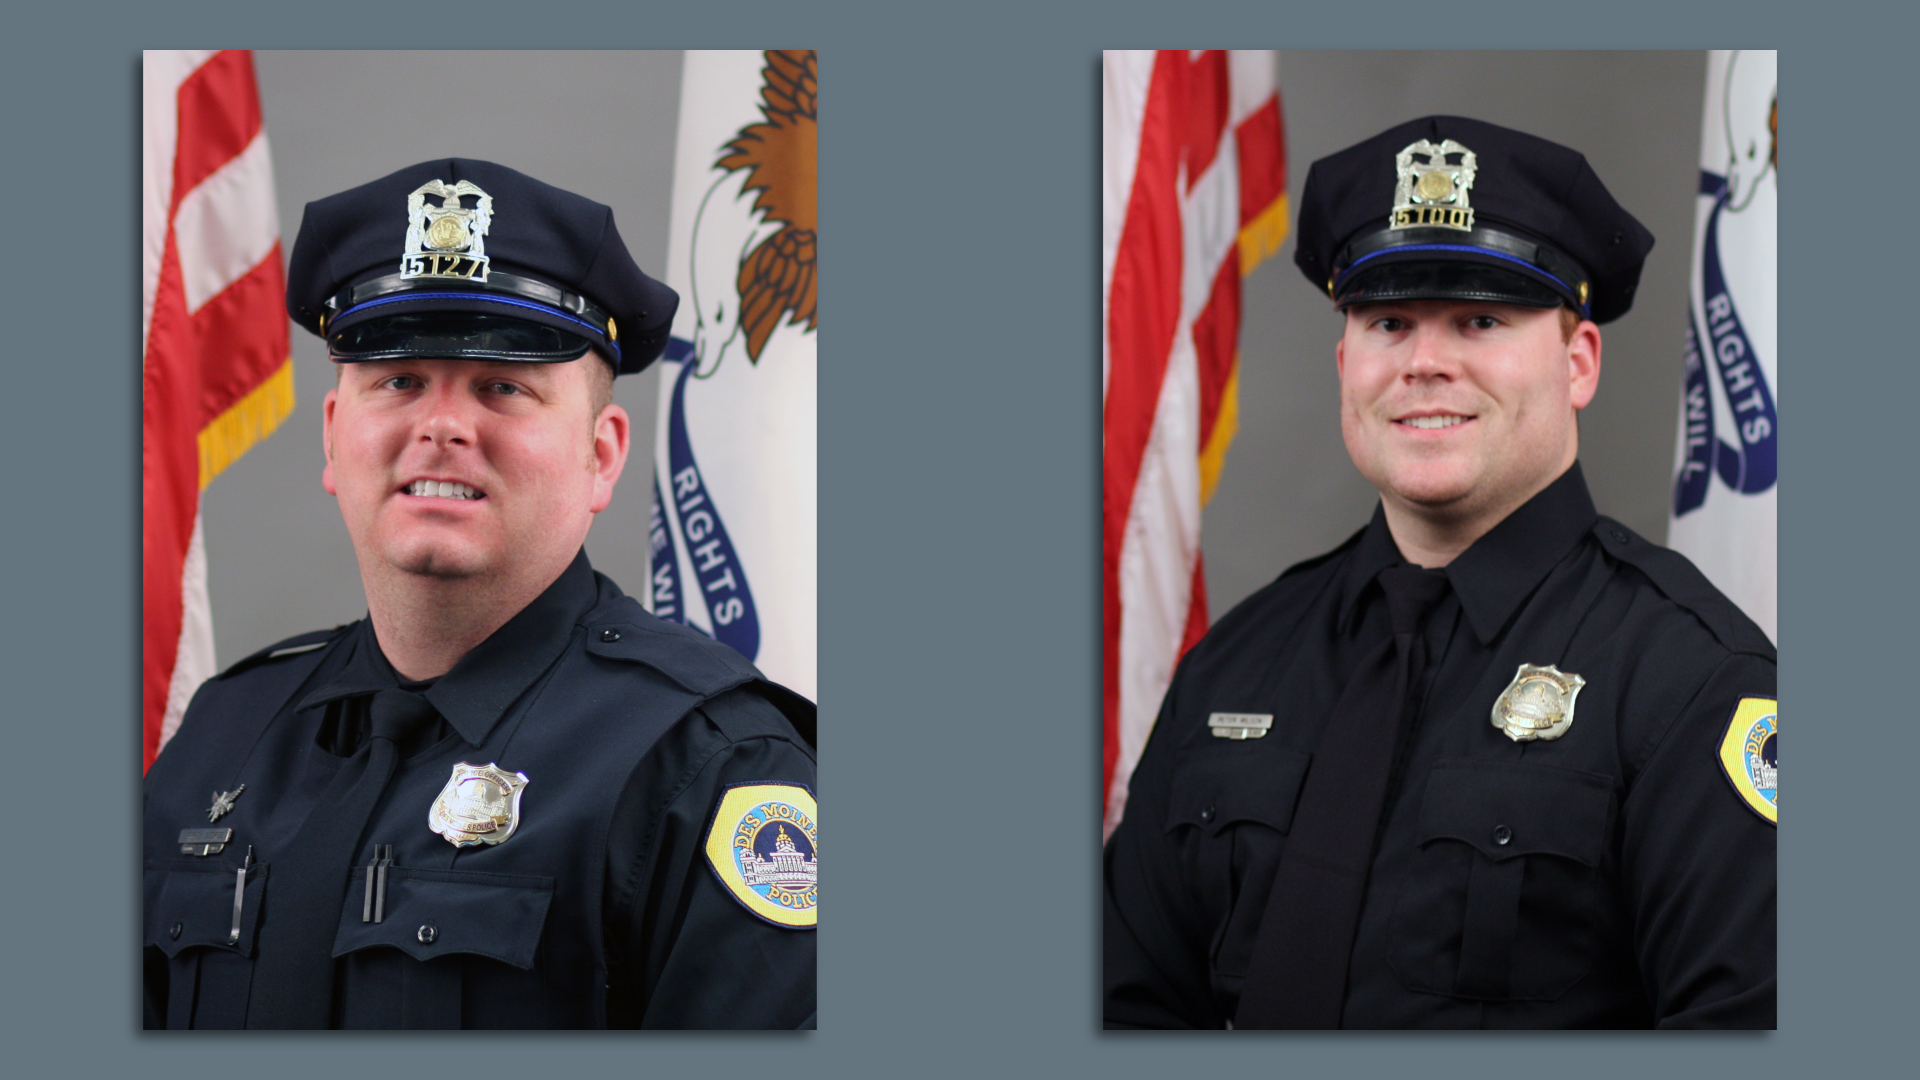 A photo of Des Moines police officers.